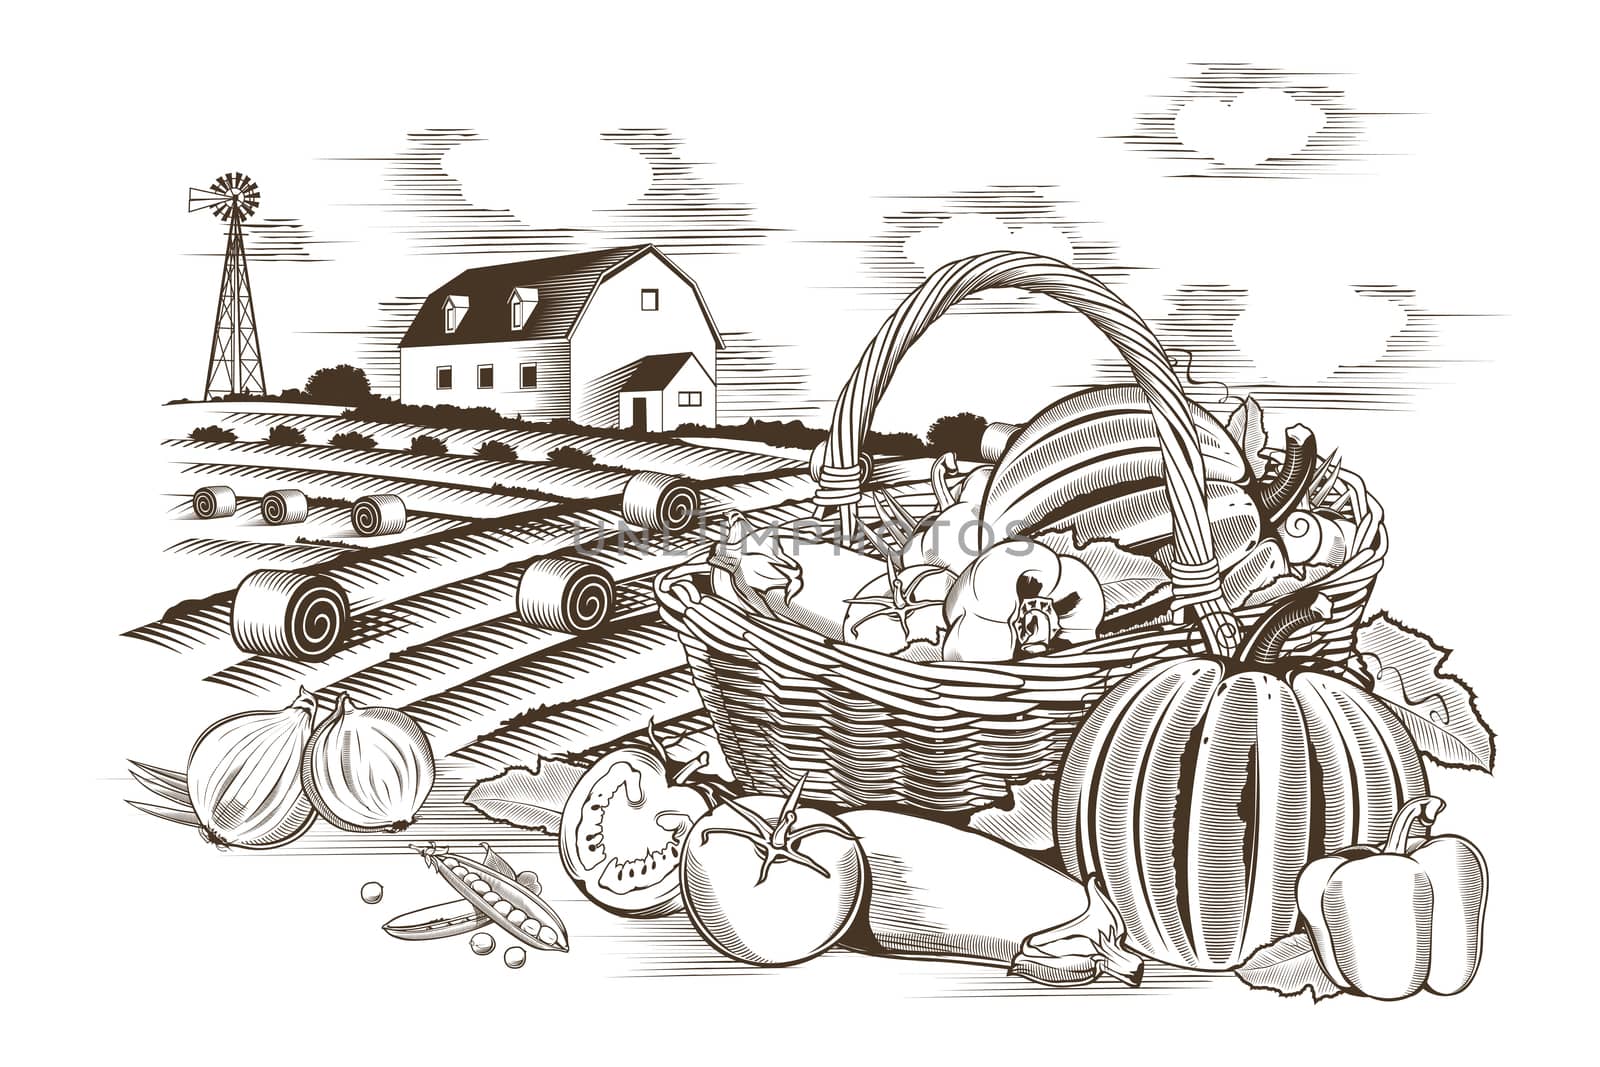 Vegetable basket and farm in woodcut style.